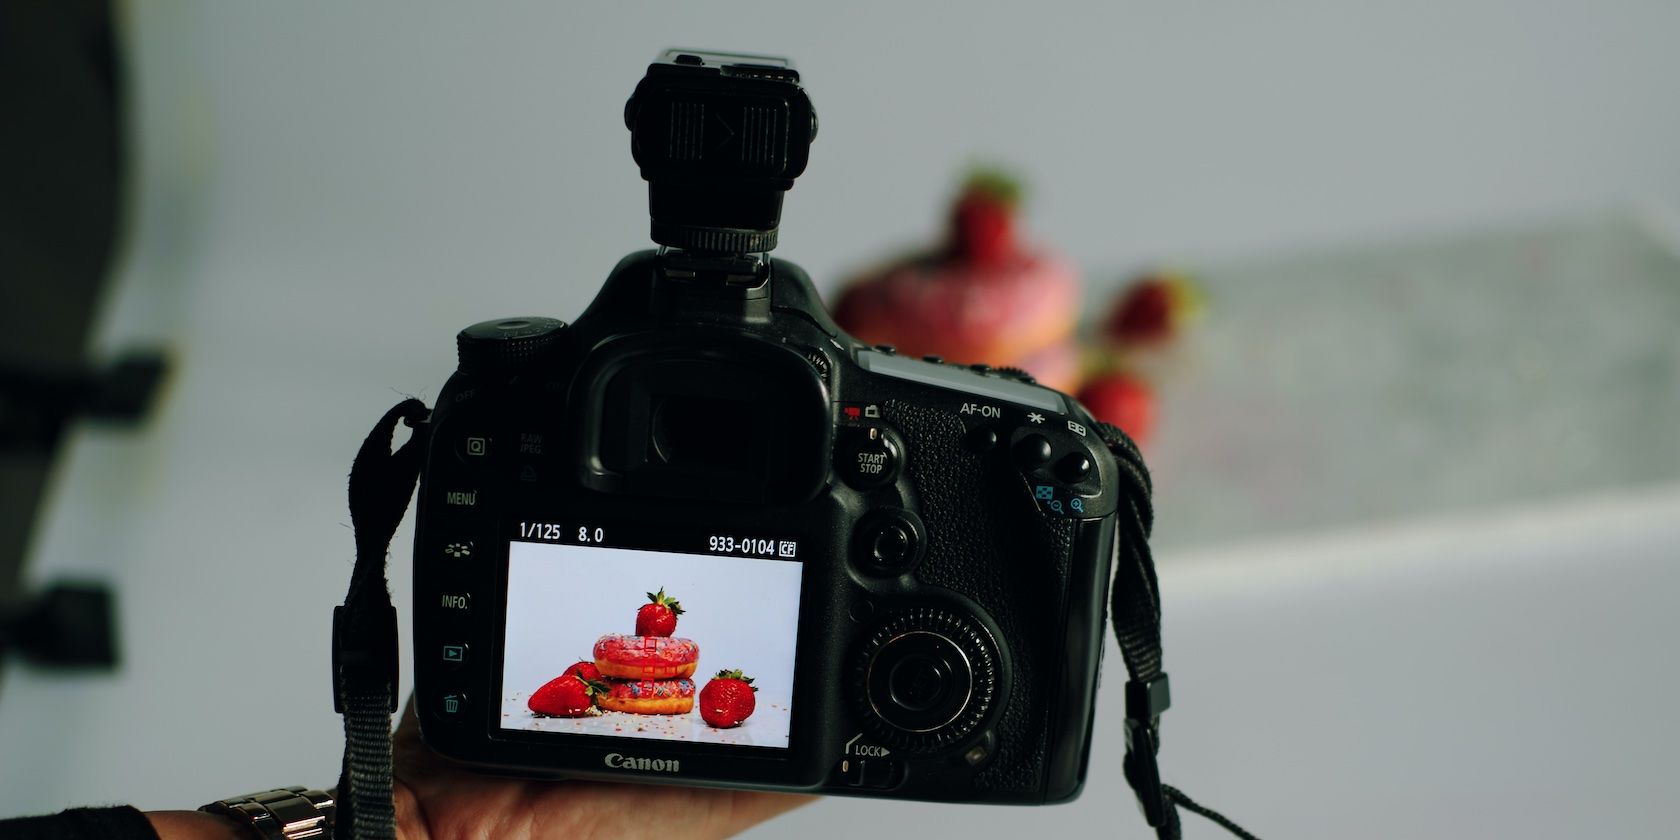 10 Compositional Tips to Make Your Food Photos Look Delicious